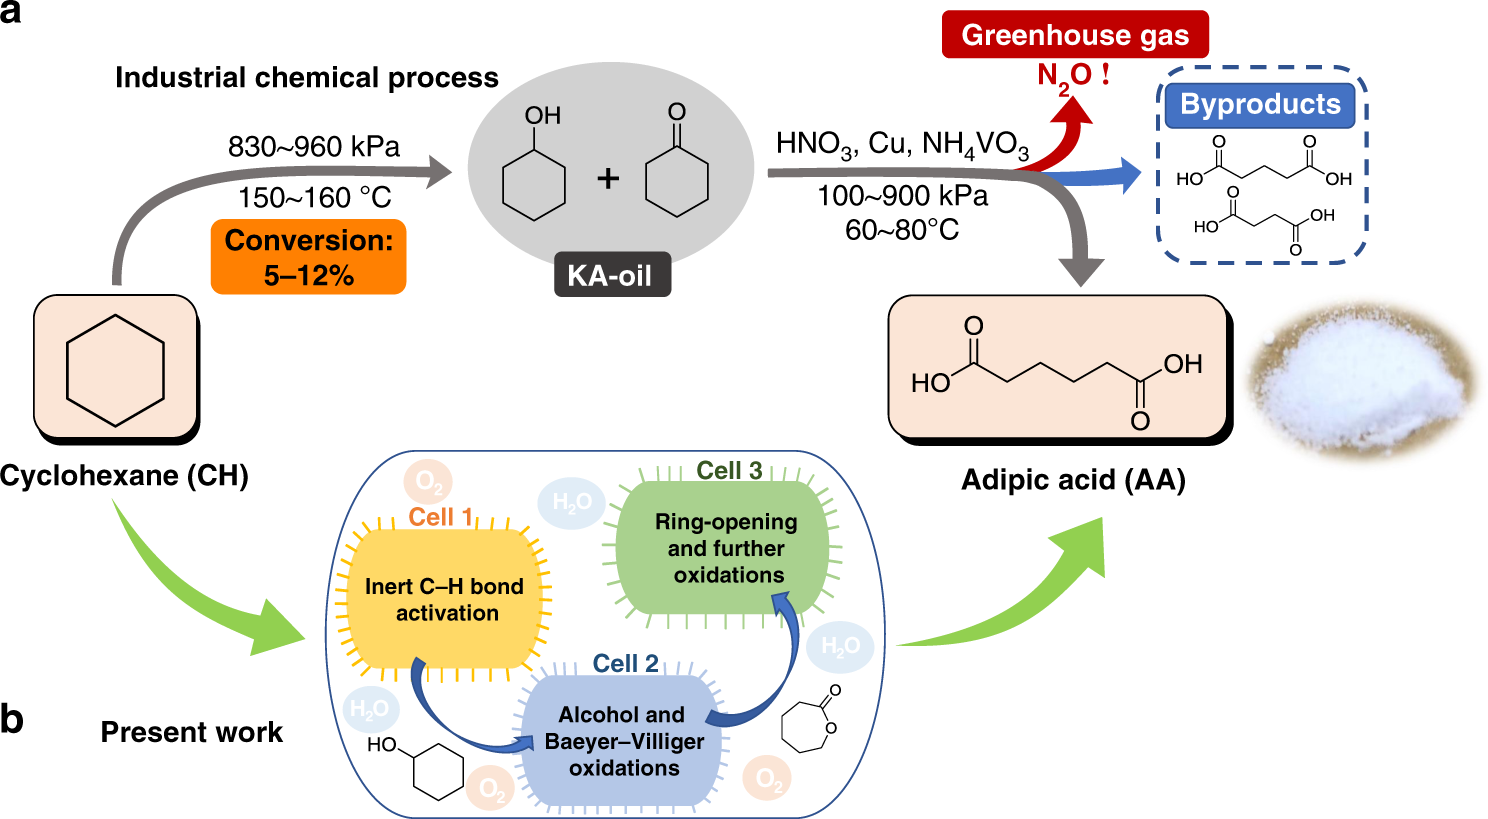 One-pot biocatalytic route from cycloalkanes to α,ω‐dicarboxylic acids by  designed Escherichia coli consortia | Nature Communications